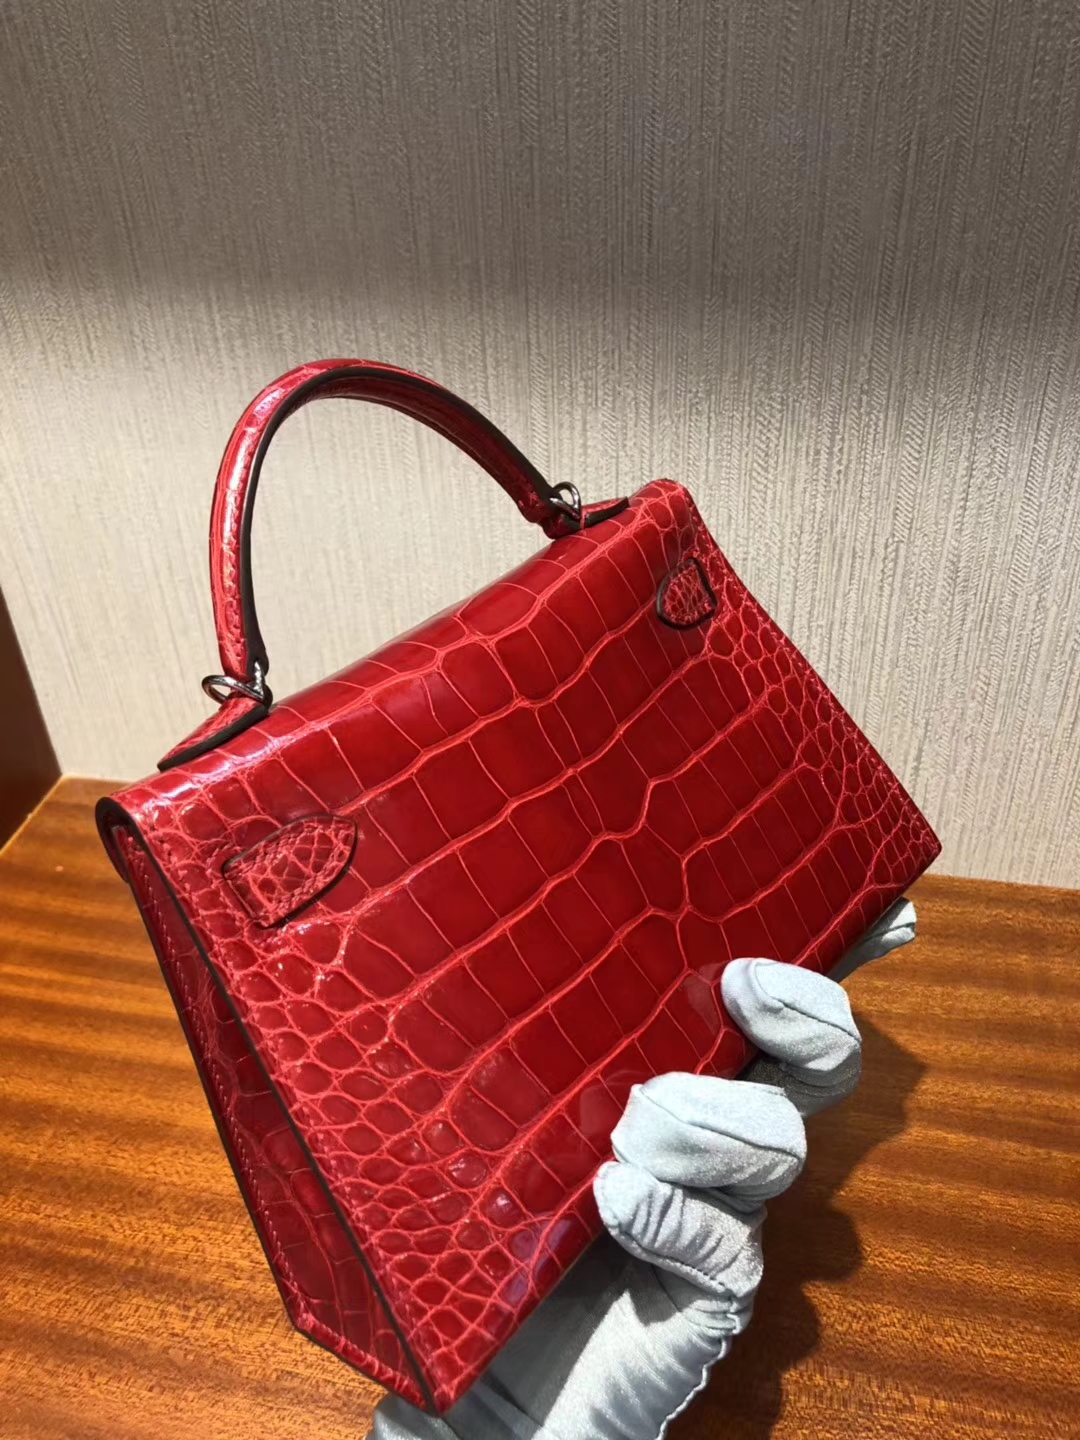 Pretty Hermes Shiny Crocodile Minikelly-2 Evening Bag in CK95 Braise Silver Hardware